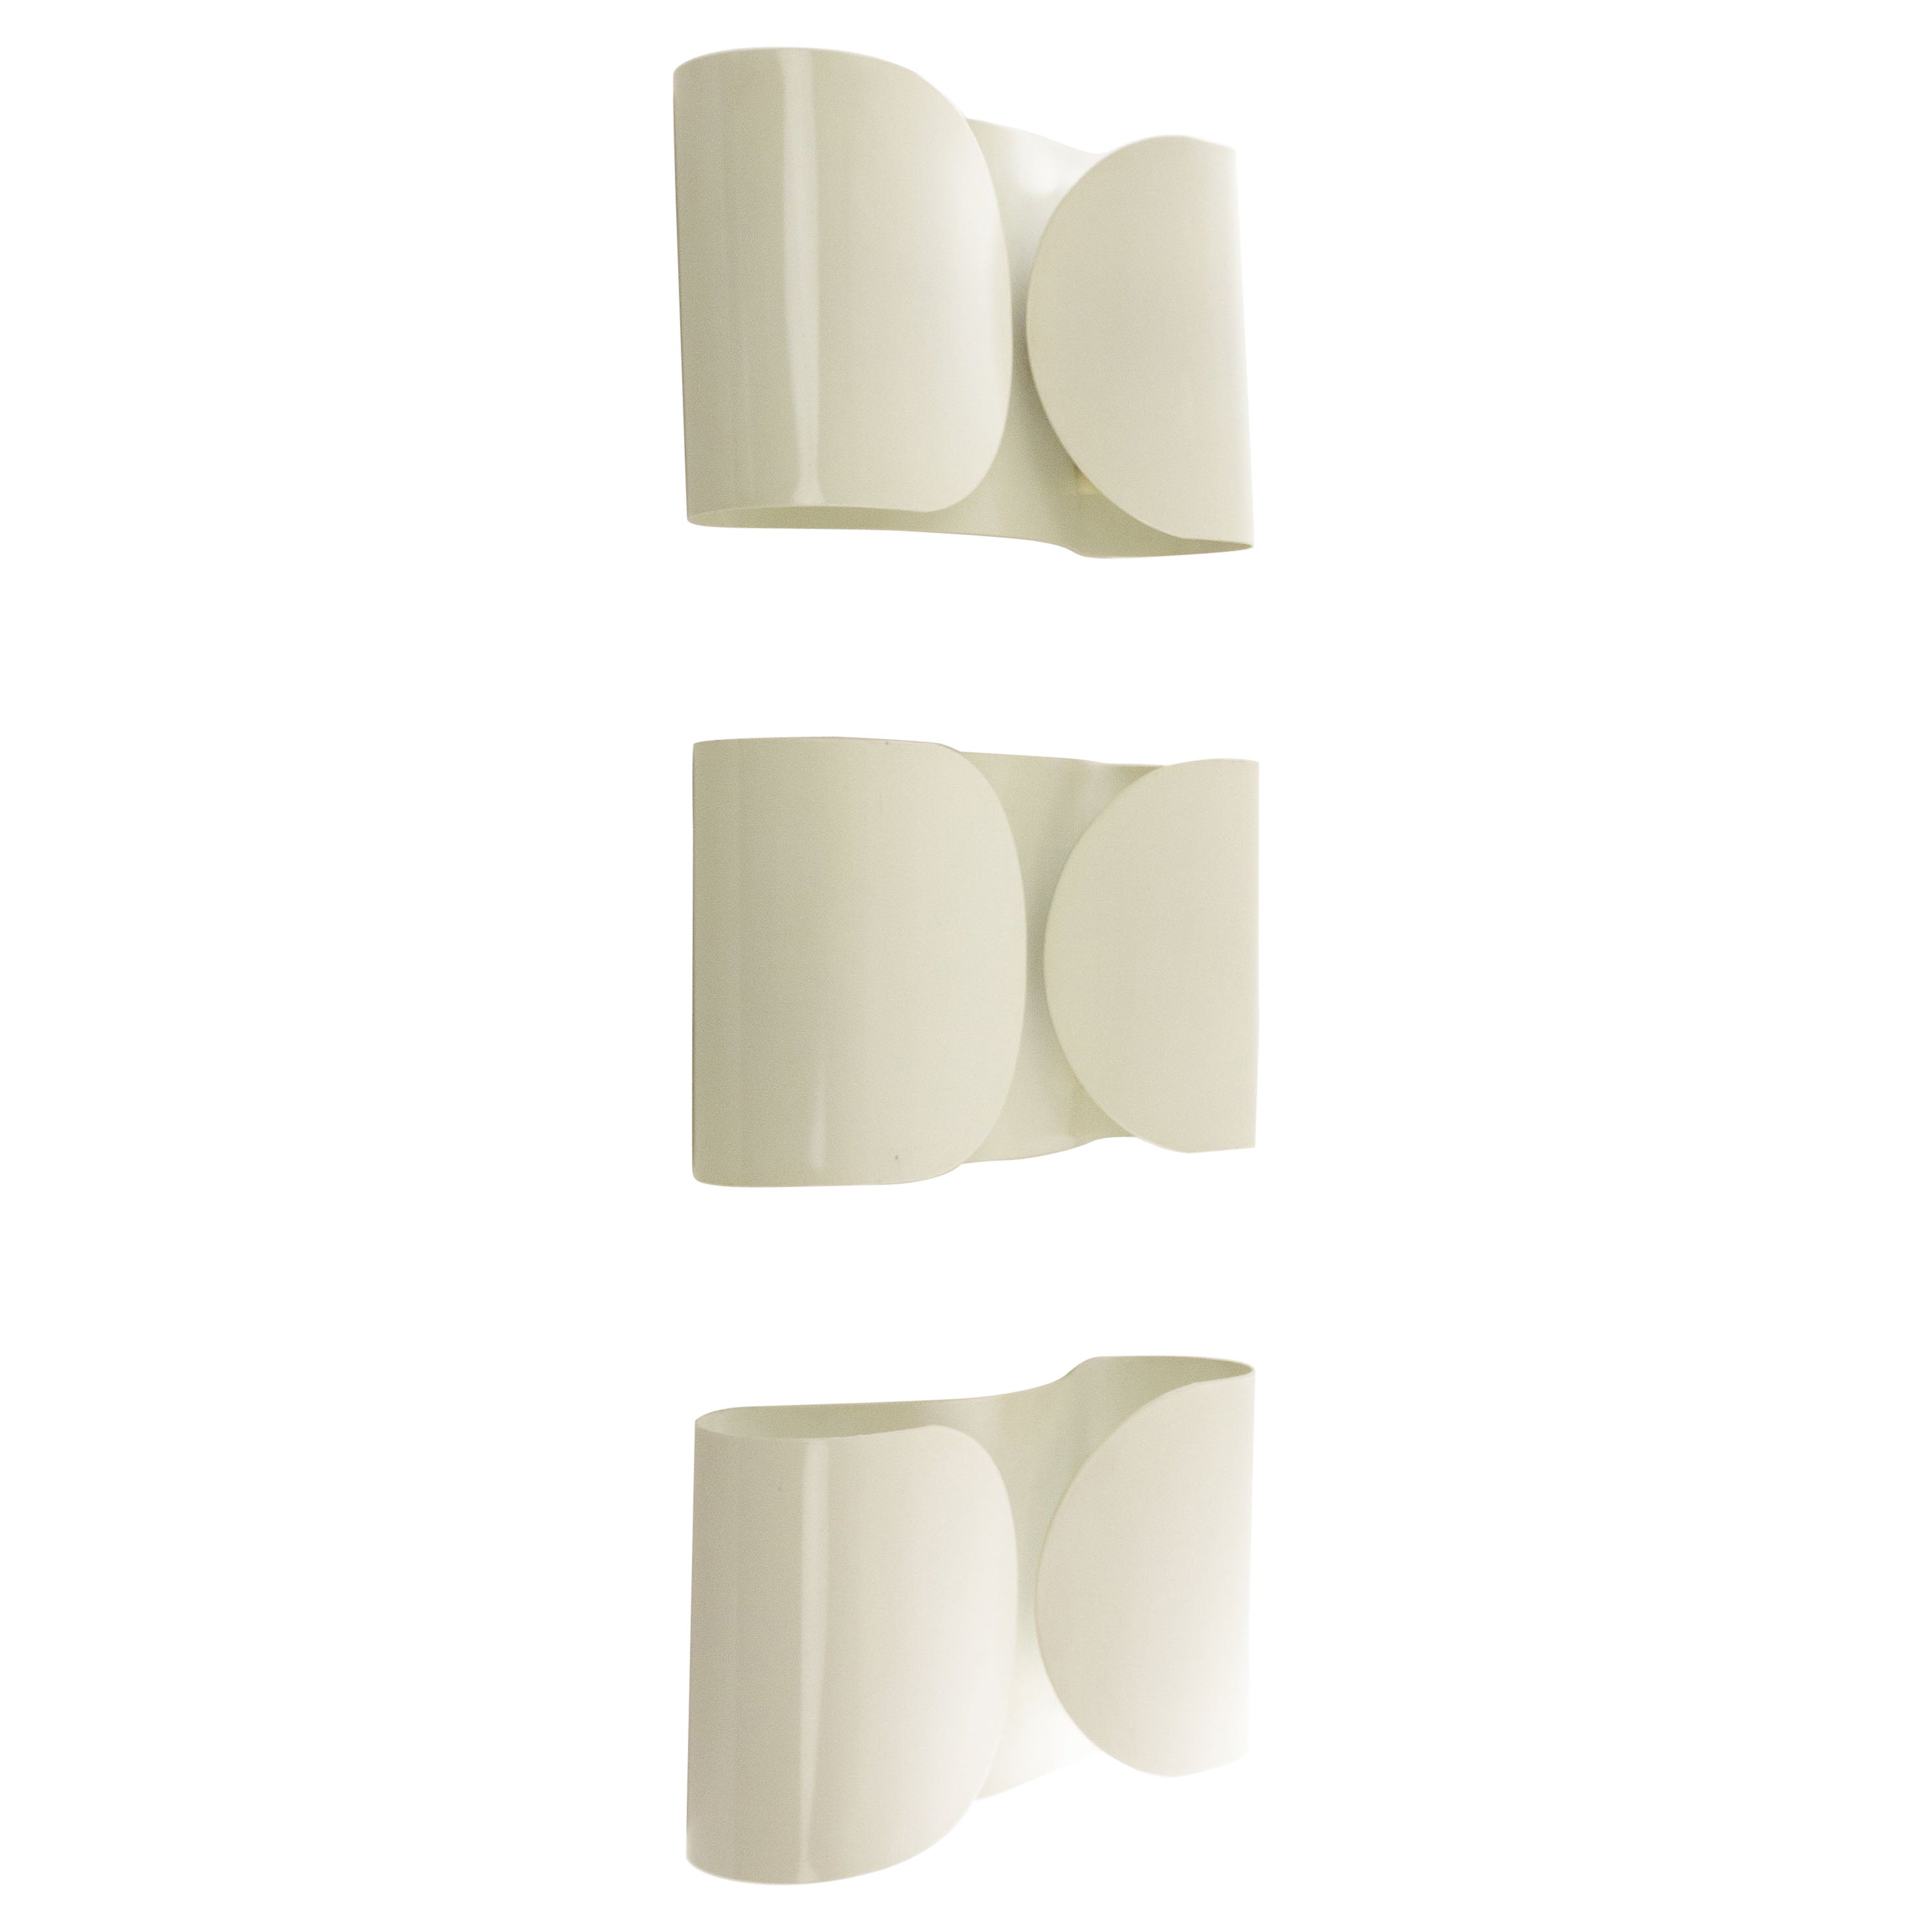 Set of Three White Foglio Wall Lamps by Tobia Scarpa for Flos, 1960s